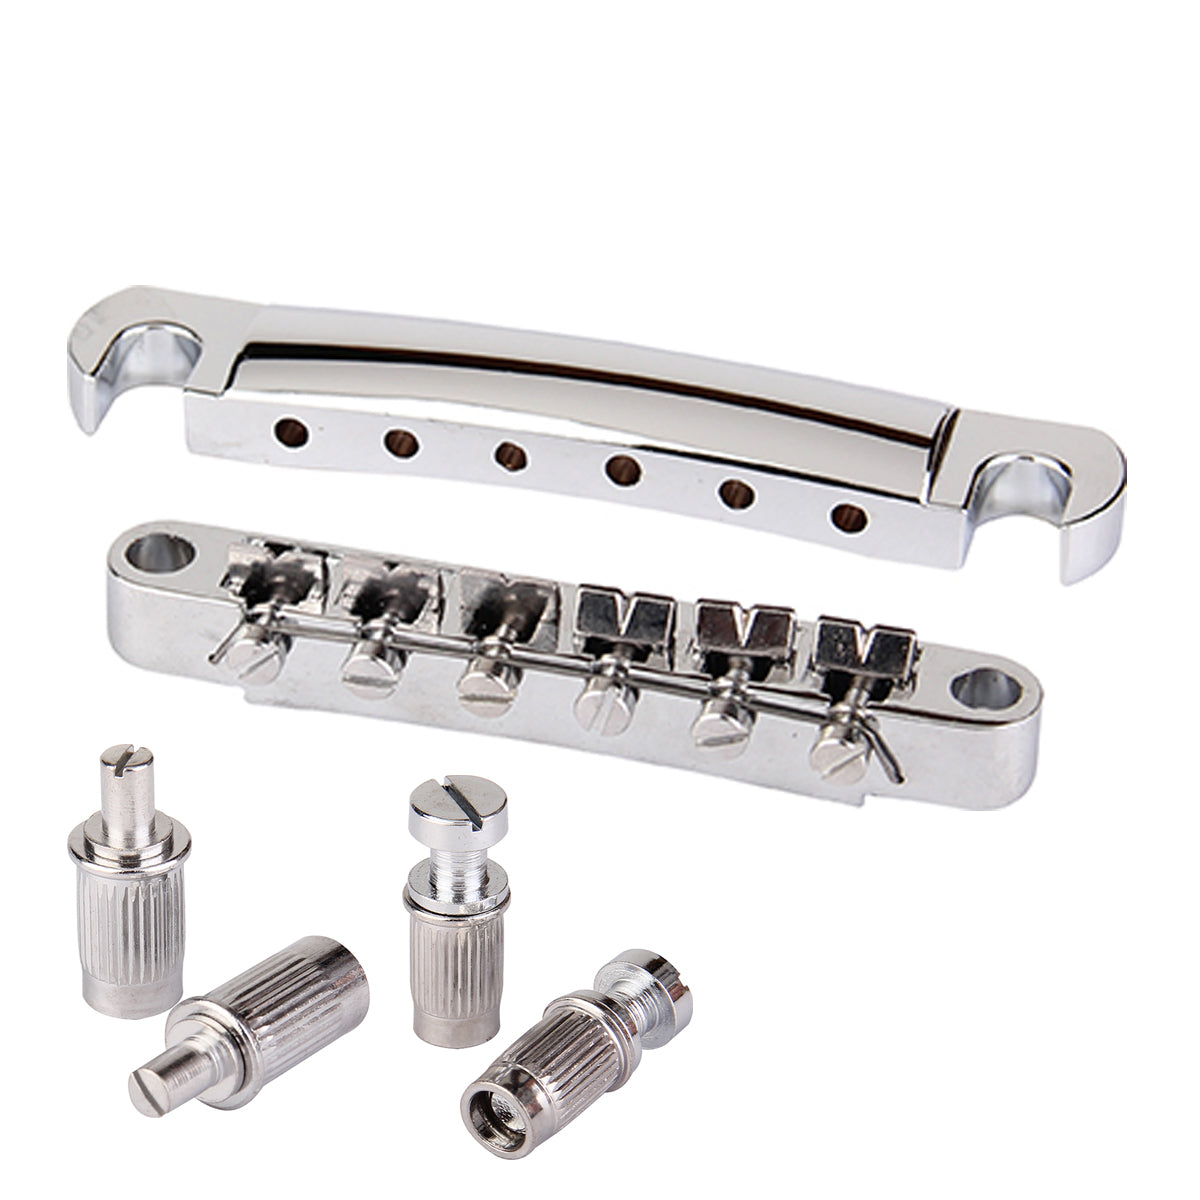 Musiclily ABR-1 Style Tune-o-matic Bridge and Tailpiece Set for Les Paul Style Guitar,Chrome